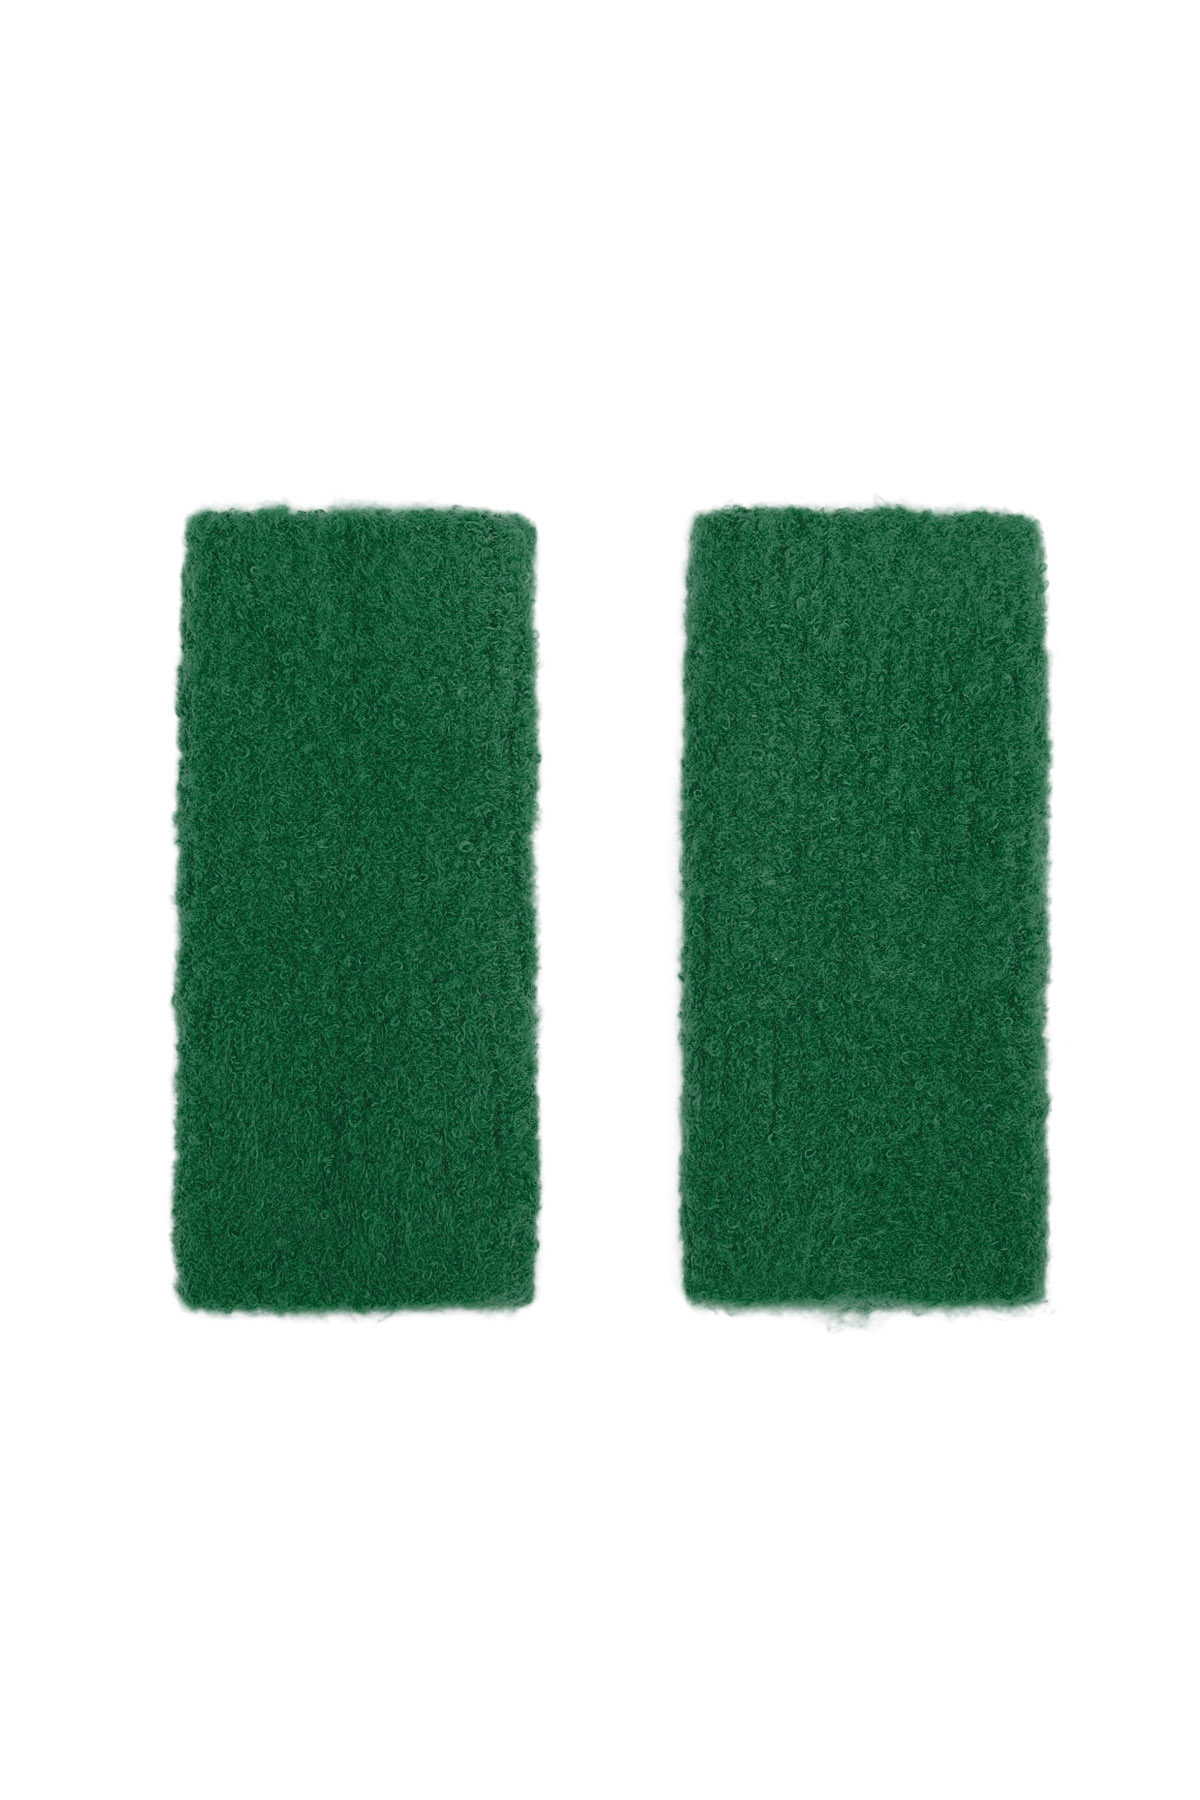 Gloves with hole - dark green h5 Picture3